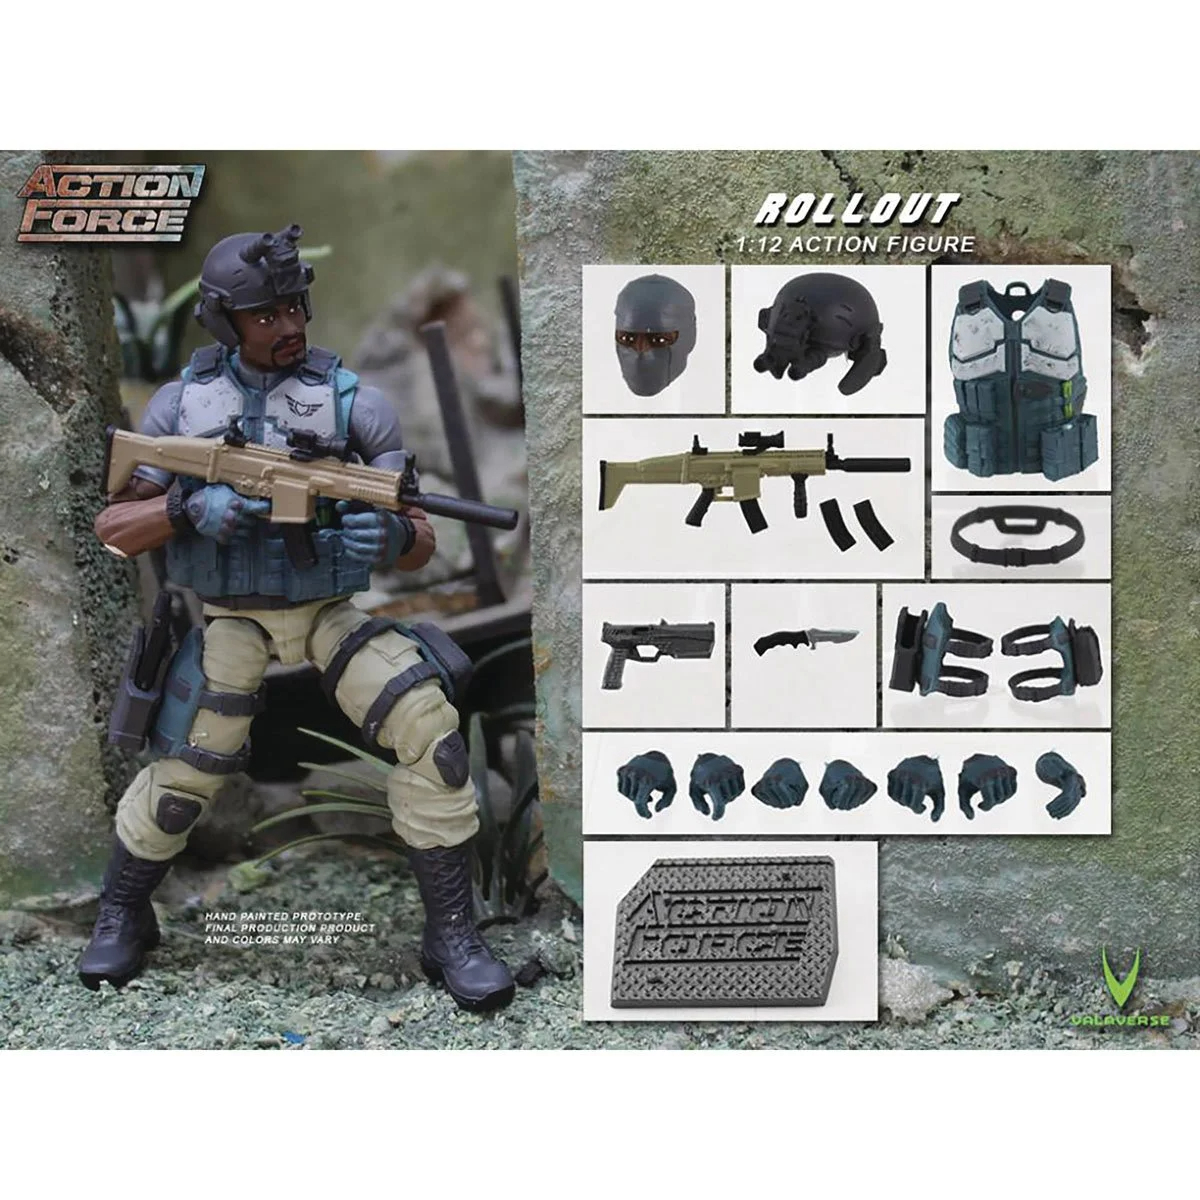 Action Force Series 2 Rollout 1:12 Scale Action Figure画像